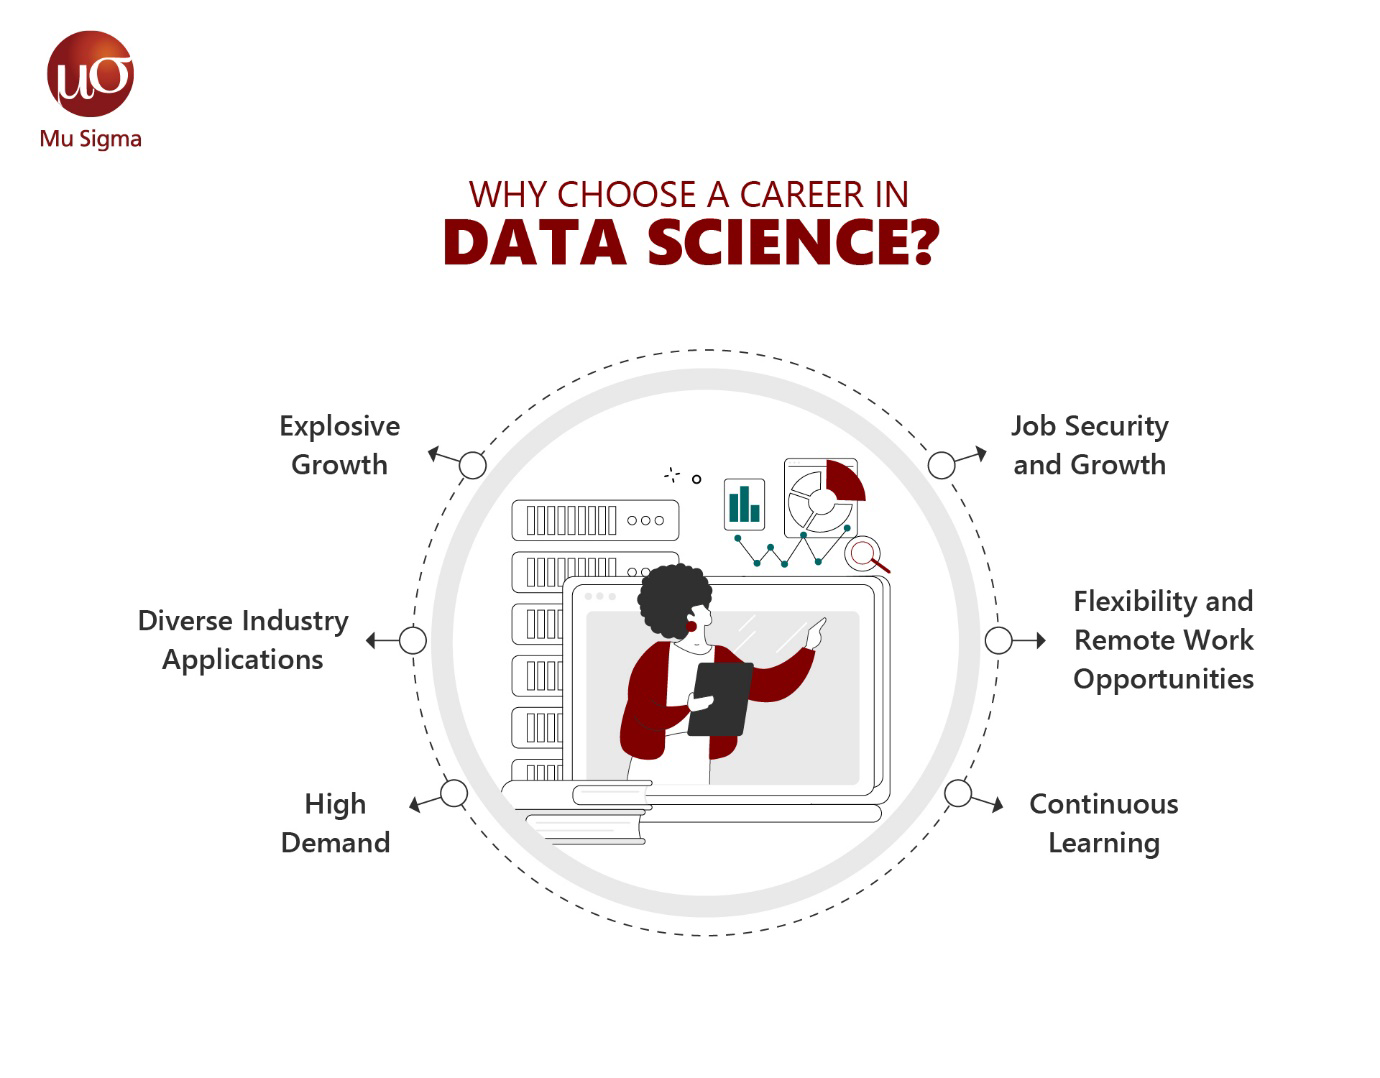 Why Choose a Career in Data Science?